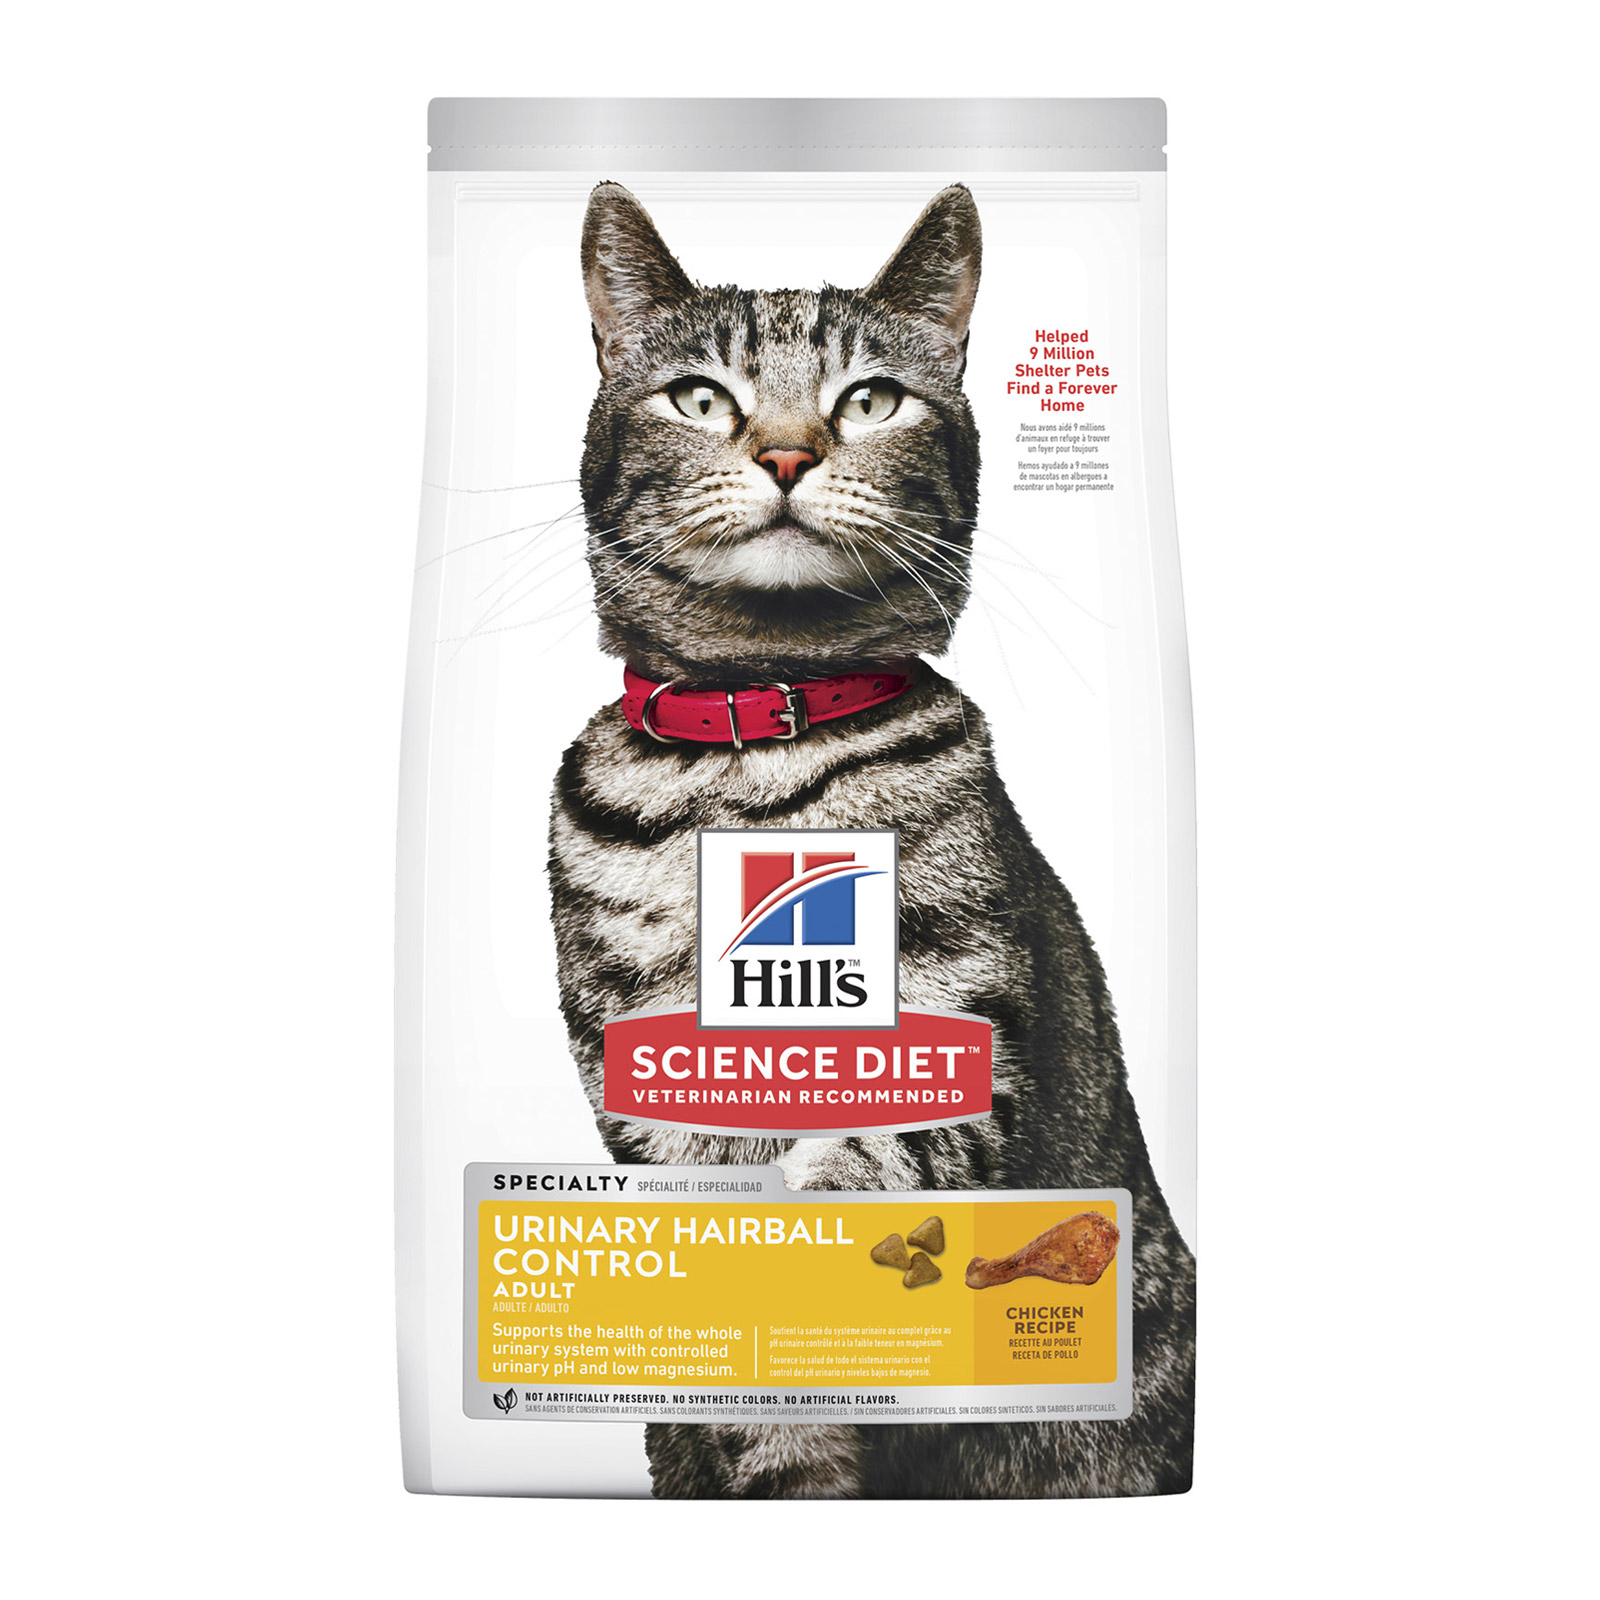 Hill's Science Diet Adult Urinary Hairball Control Dry Cat Food for Food